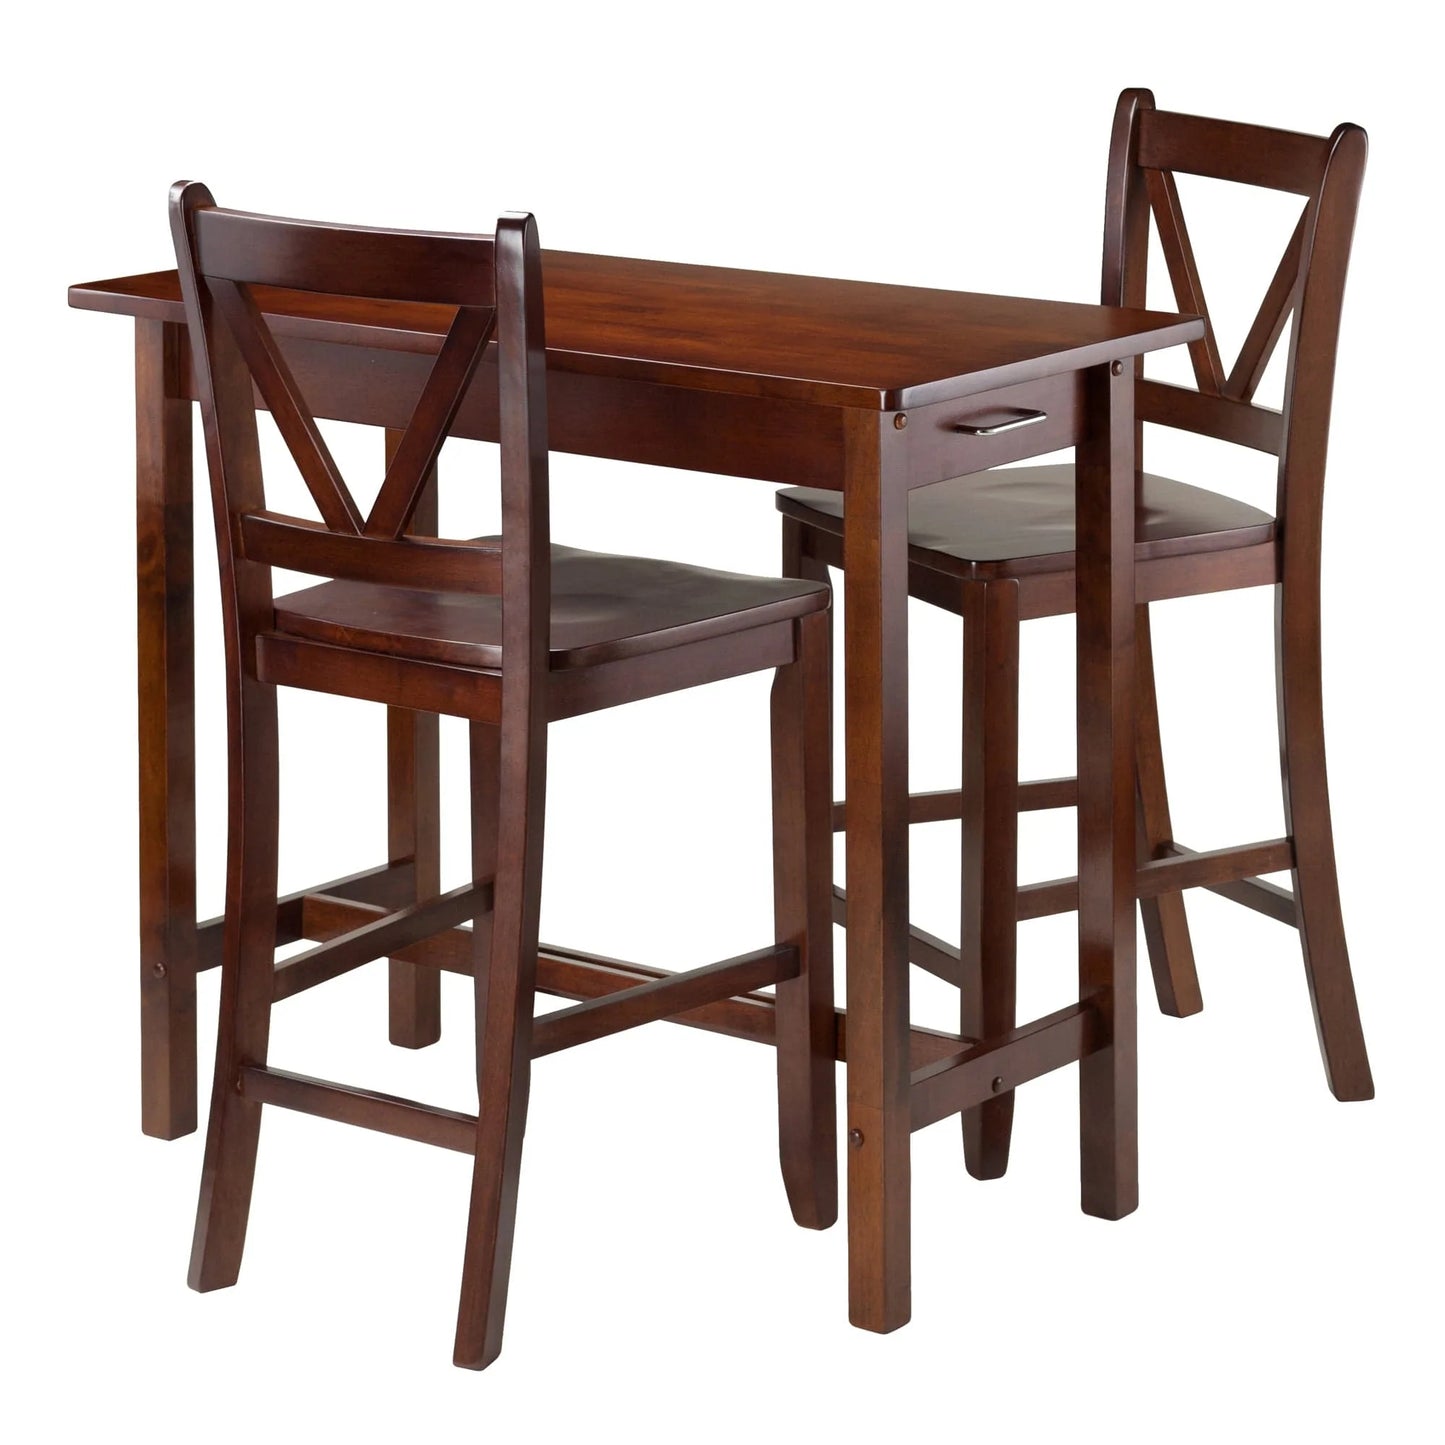 WINSOME Pub Table Set Sally 3-Pc Breakfast Table with V-back Counter Stools, Walnut